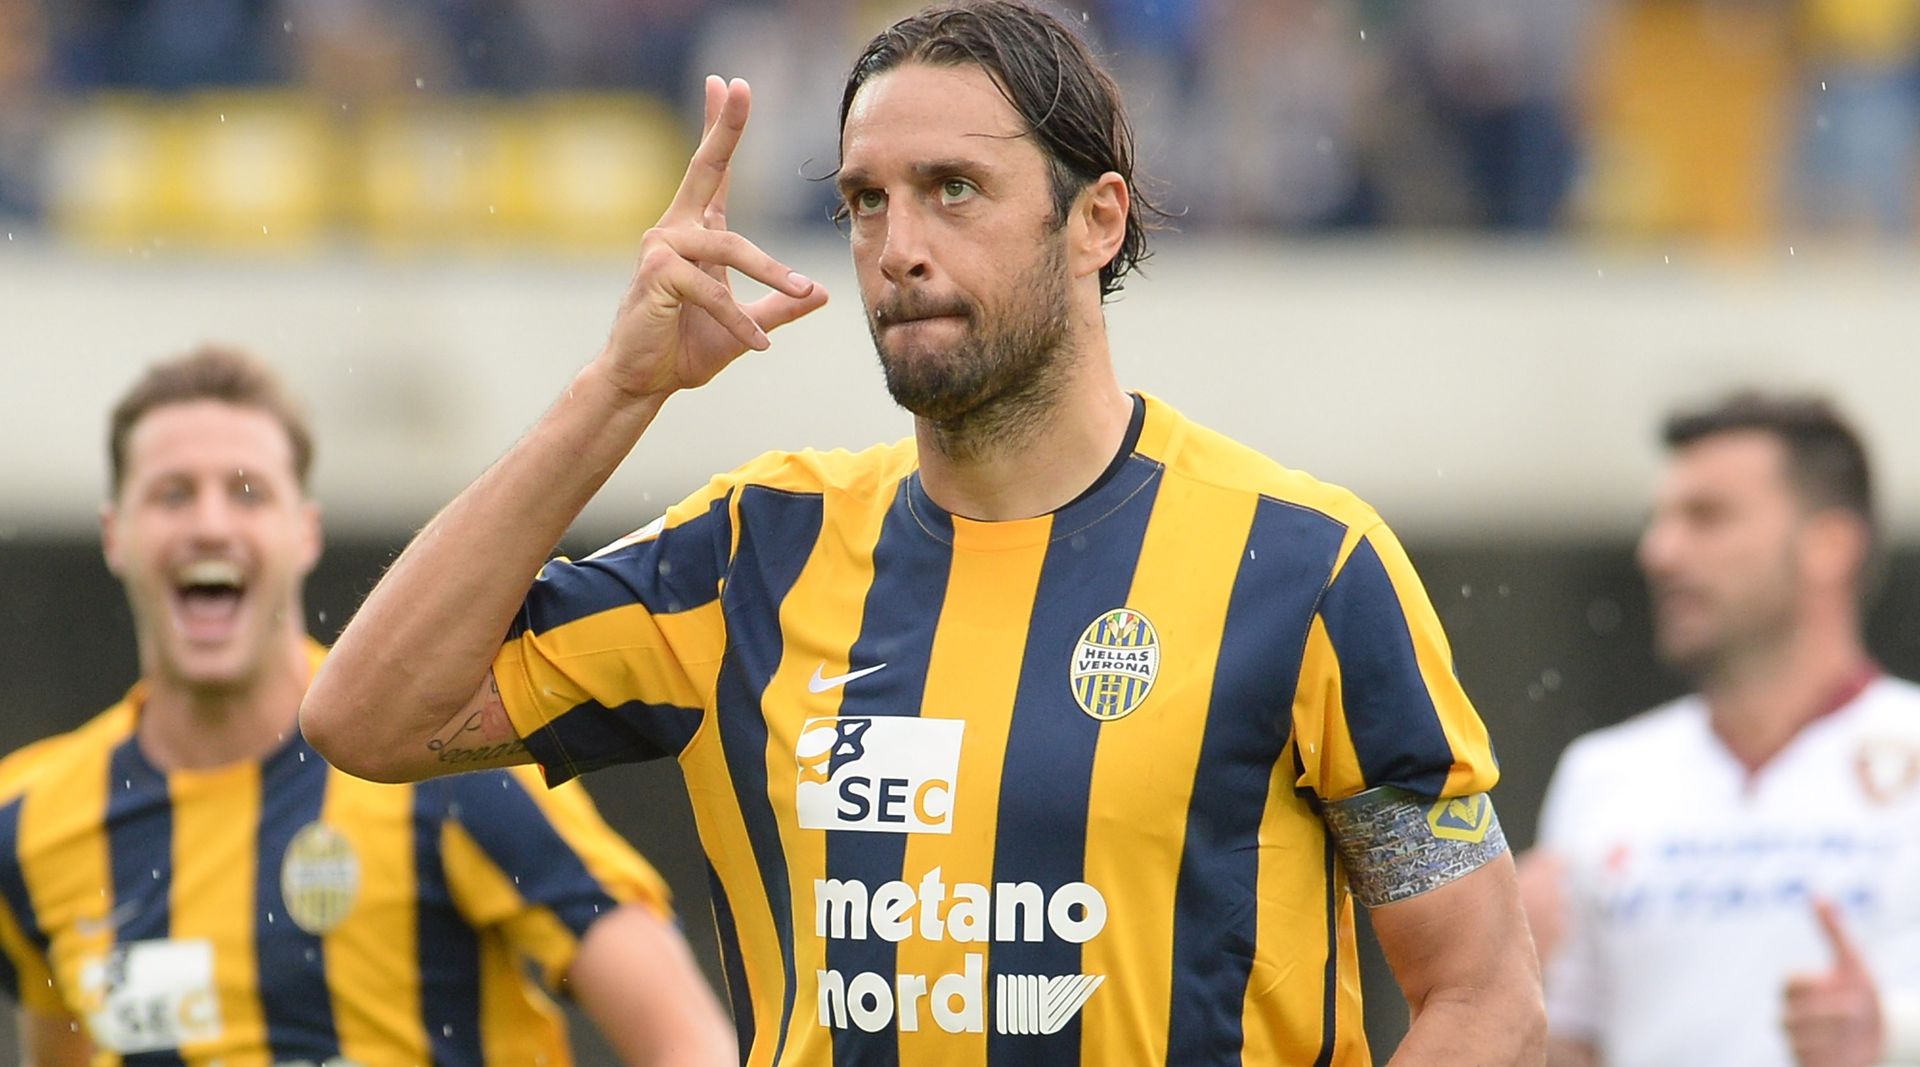 <p>                     Serie A top scorer in 2005/06 while at Fiorentina, Luca Toni left for Bayern Munich in 2007 – but he returned to Italy in 2010 with unfinished business.                   </p>                                      <p>                     And, in the penultimate season of his career, in the colours of Hellas Verona, the 2006 World Cup winner made history by claiming the <em>Capocannoniere</em> for the second time – at the record-breaking age of 38.                   </p>